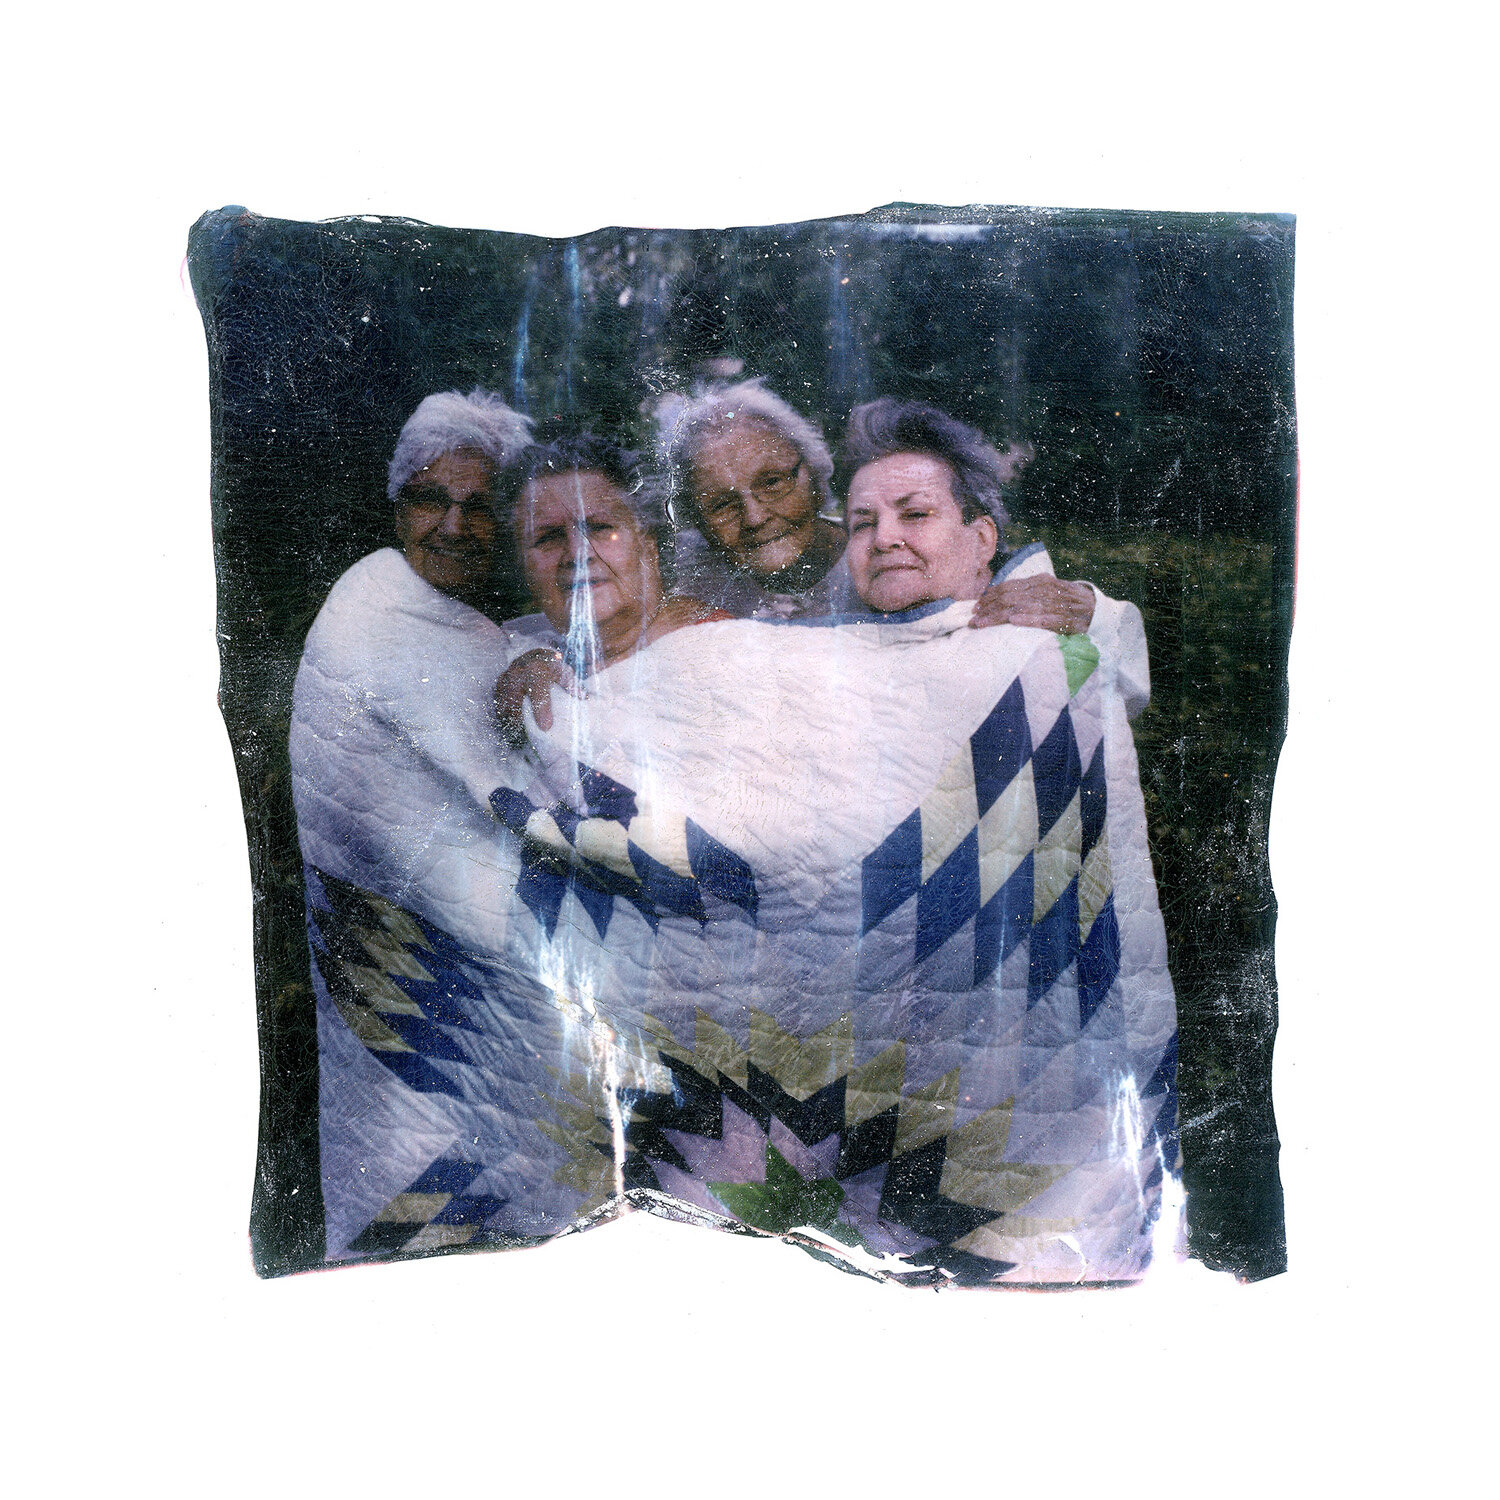 The Charbonneau sisters, from left to right, Francine Soli, 71, Barbara Dahlen, 67, Joann Braget, 78, and Louis Aamot, 69, pose in a quilt made by their mother, in Walhalla, ND., on Tuesday, Oct. 8, 2019. The sisters who are Native American, say they were sexually abused at a Catholic school on reservation. (AP Photo/Wong Maye-E)